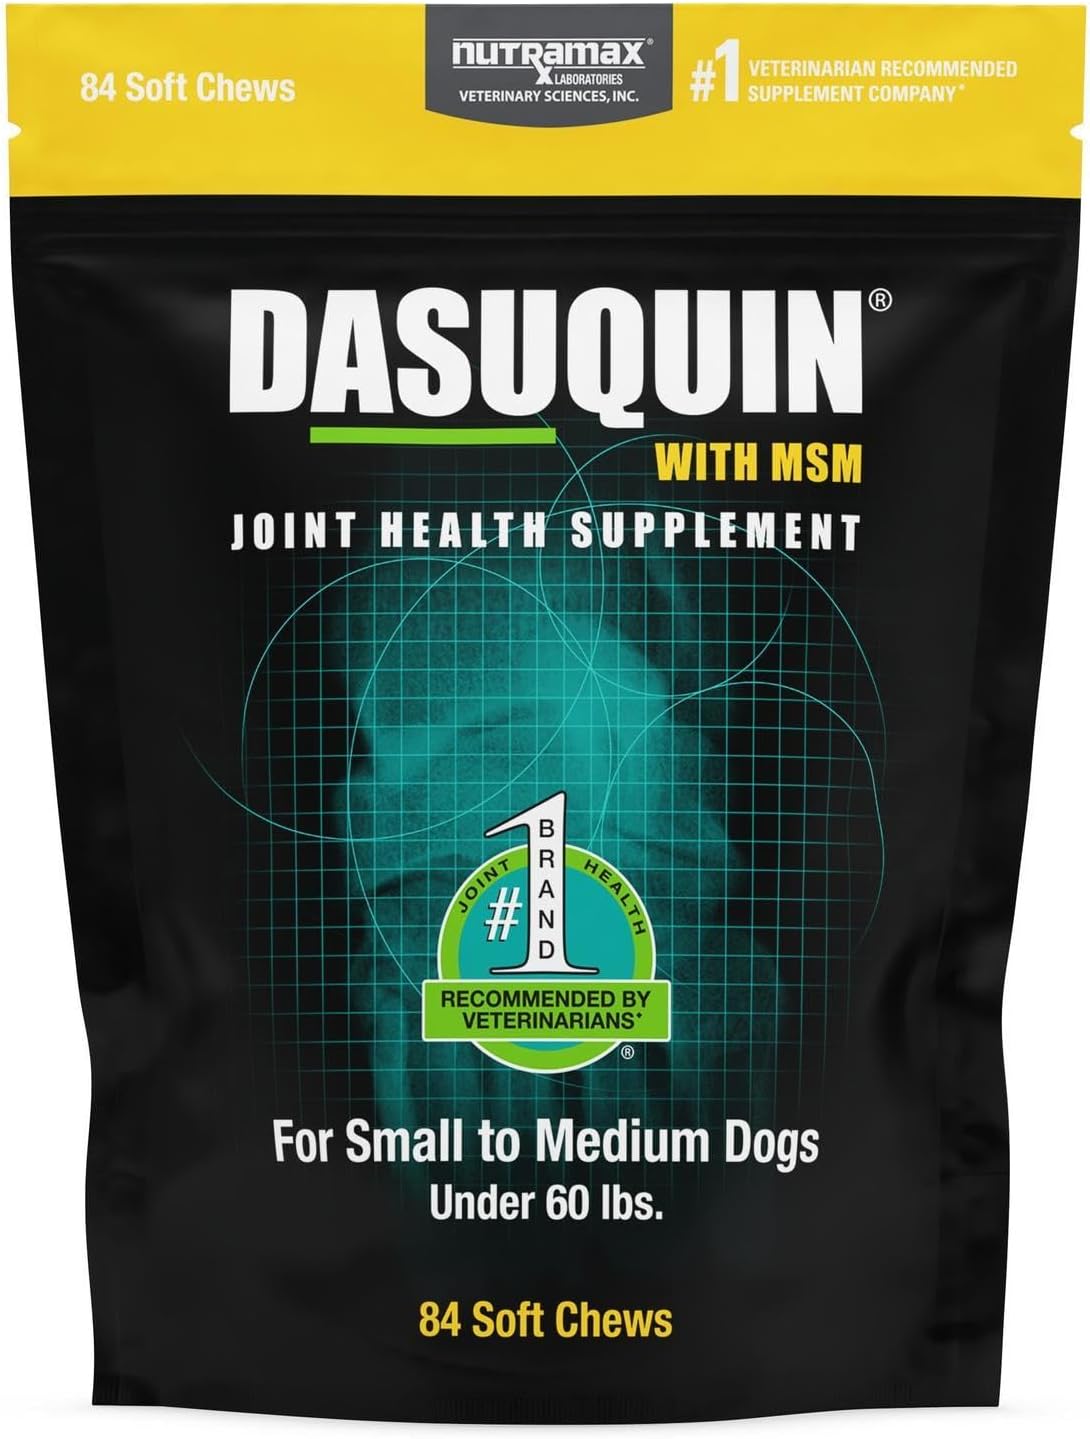 Nutramax Laboratories Dasuquin with MSM Joint Health Supplement for Small to Medium Dogs - With Glucosamine, MSM, Chondroitin, ASU, Boswellia Serrata Extract, and Green Tea Extract, 84 Soft Chews